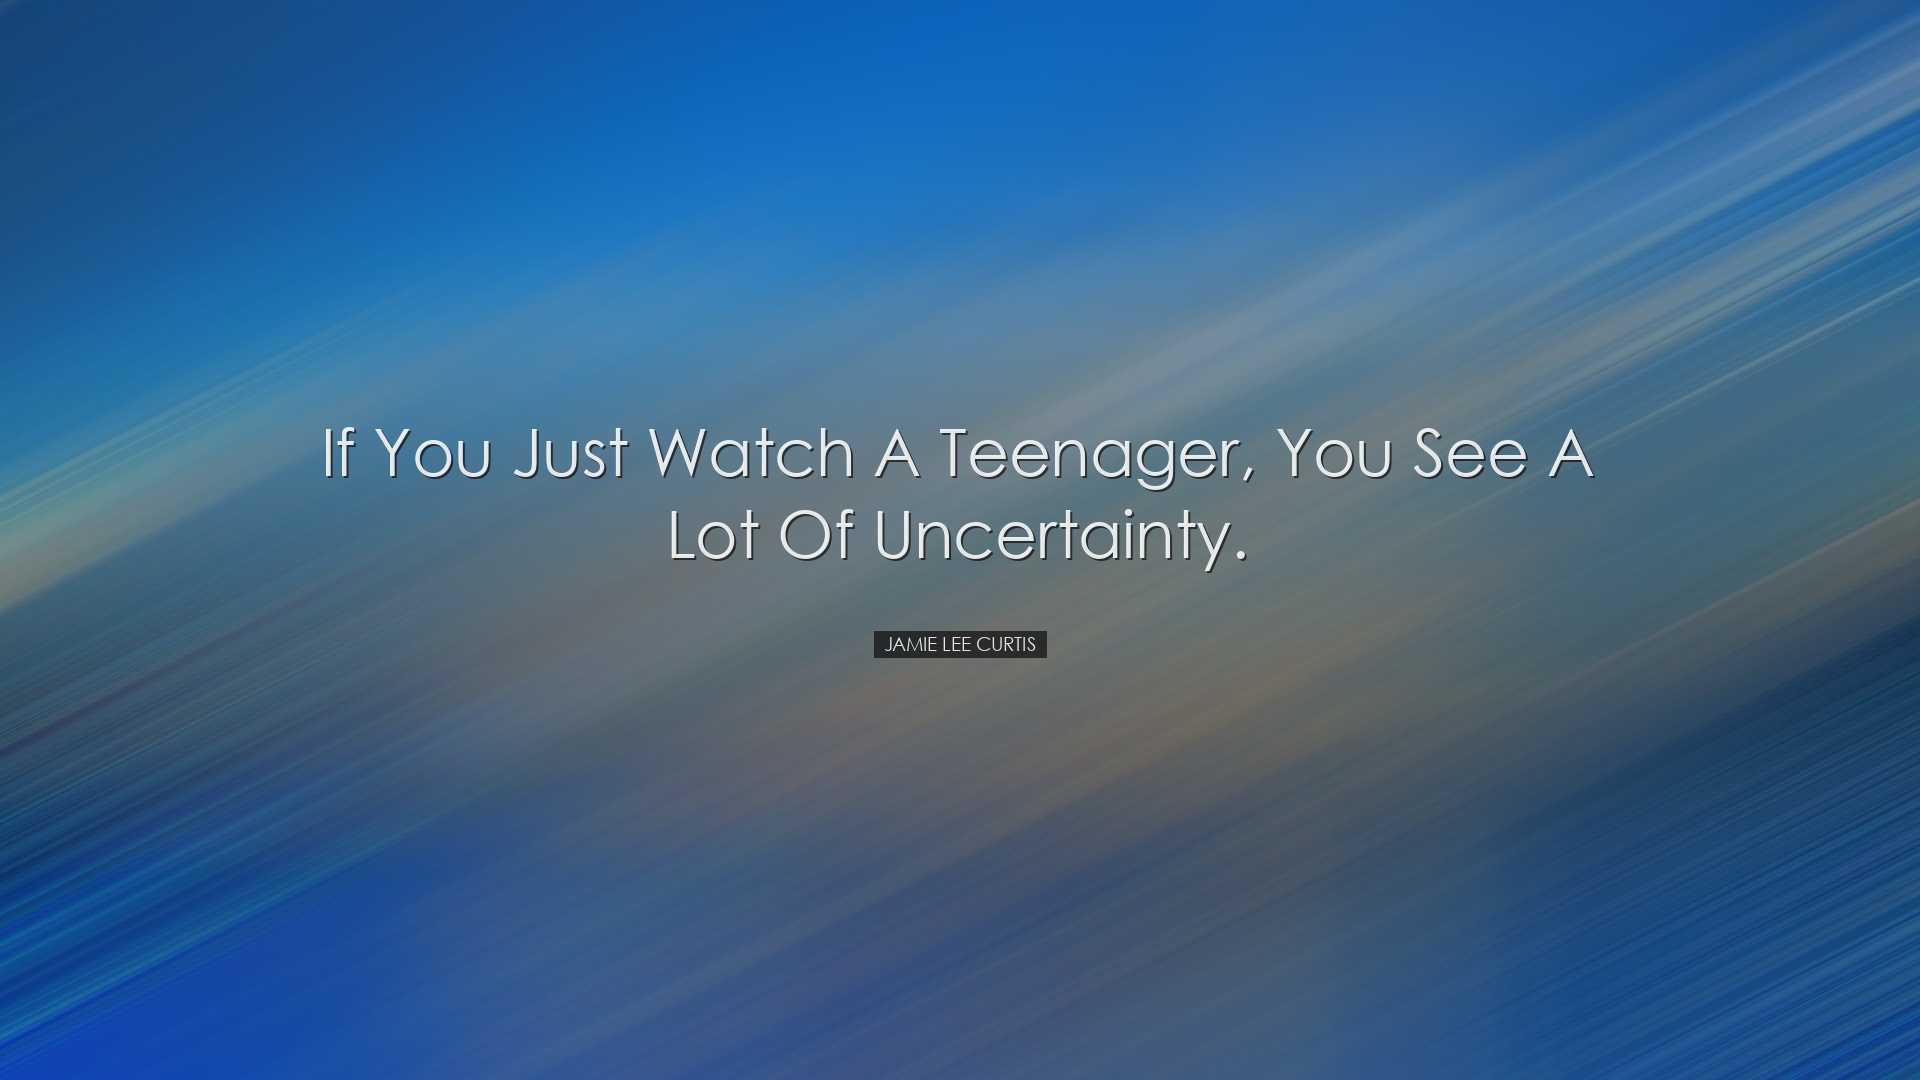 If you just watch a teenager, you see a lot of uncertainty. - Jami